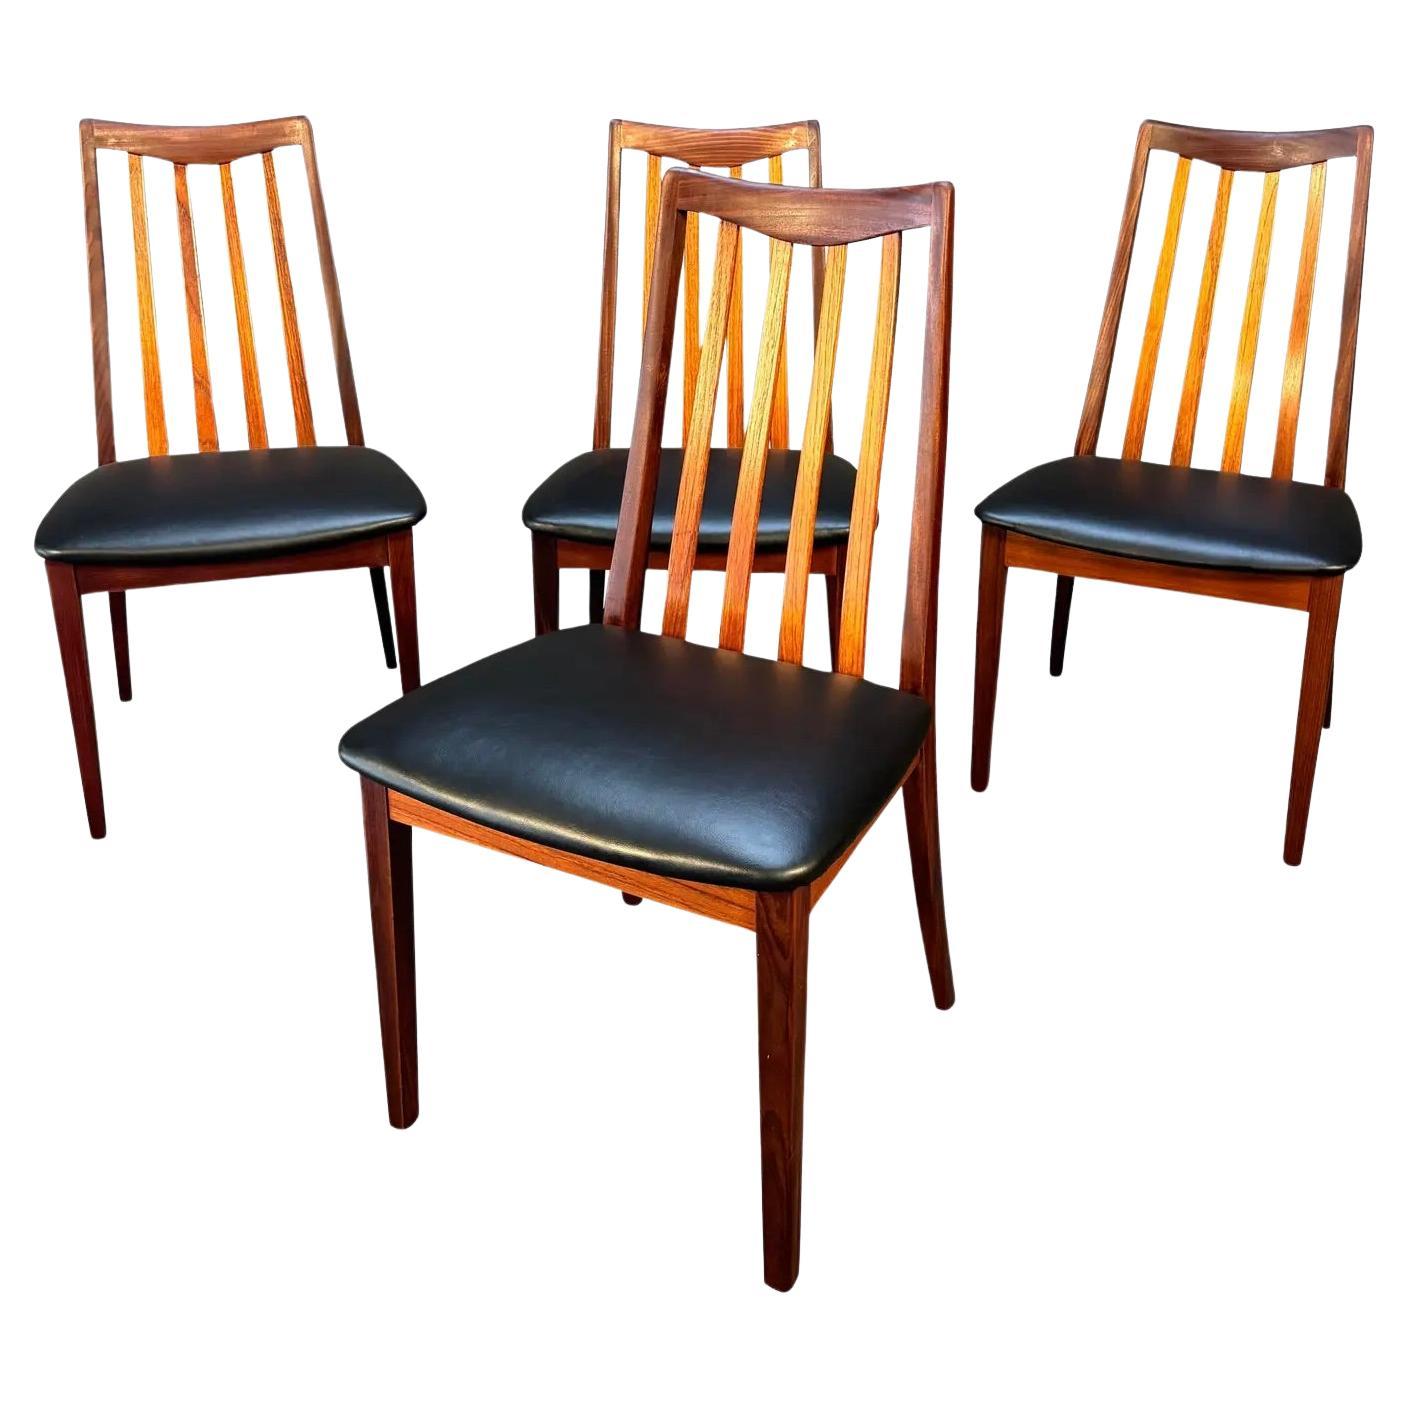 Set of Four Vintage British Mid Century Modern Teak Dining Chairs by G Plan For Sale